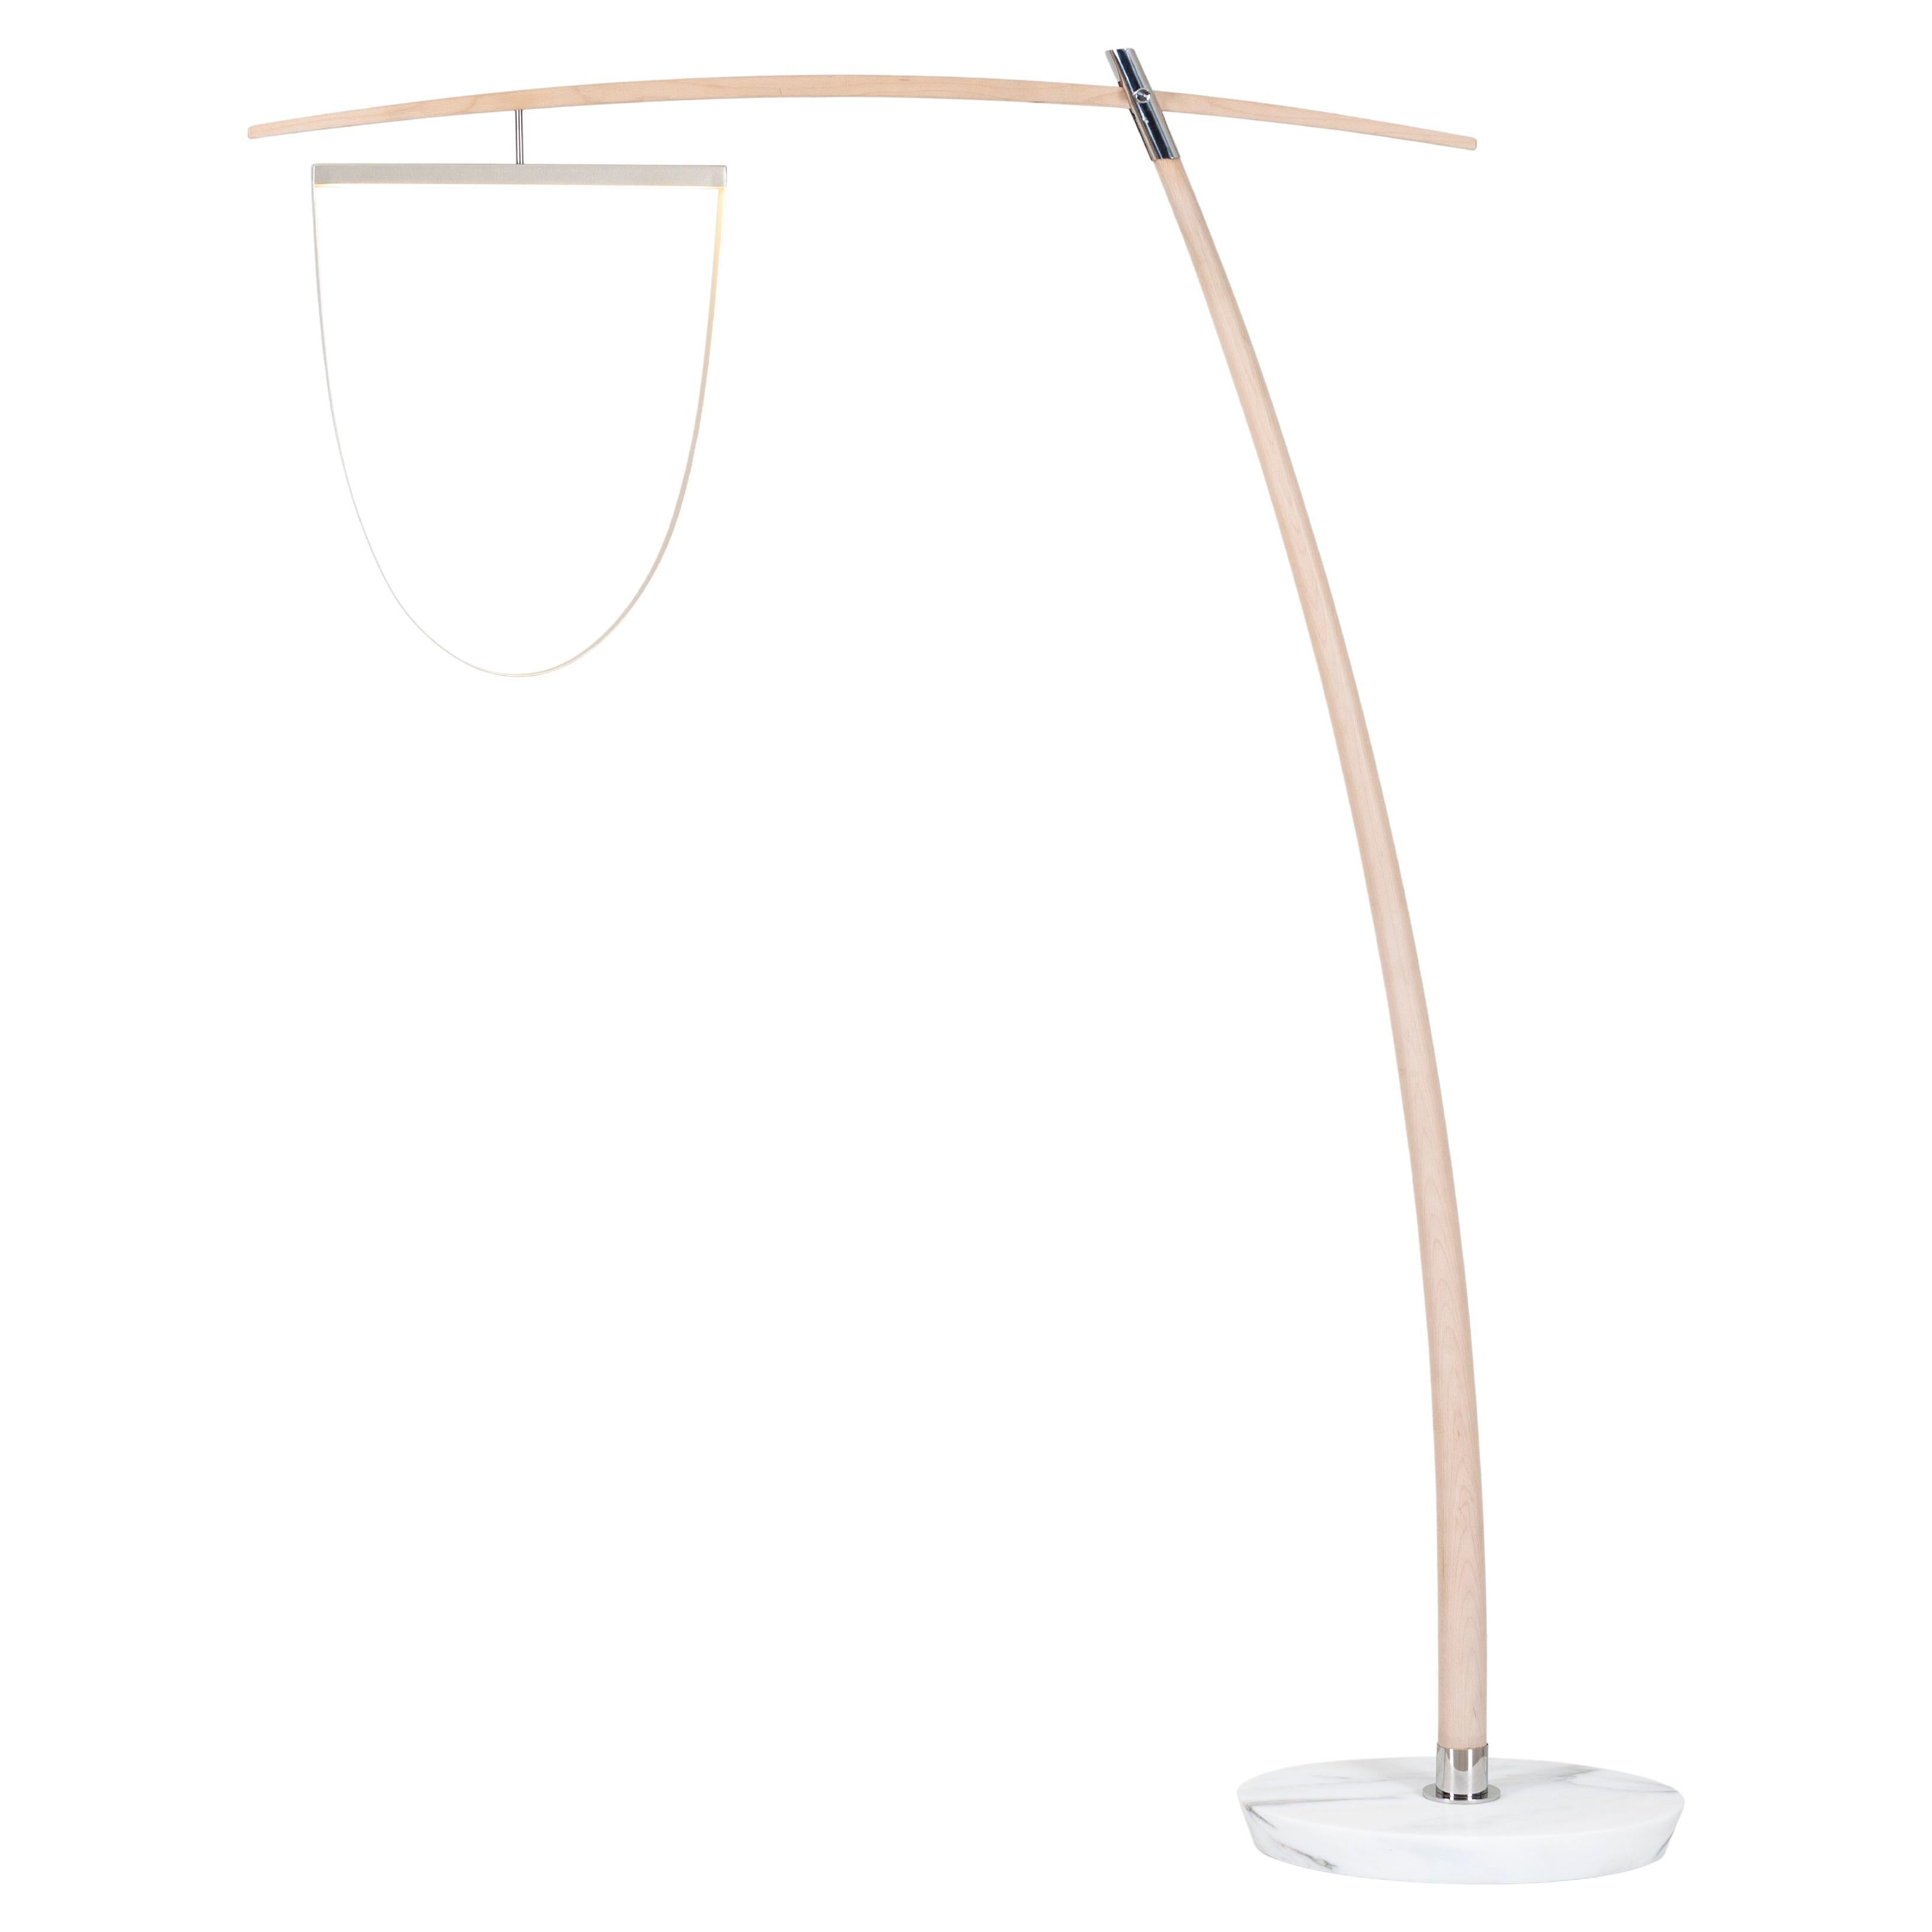 21st Century Modern Lima Arc Floor Lamp Handcrafted in Portugal by Greenapple